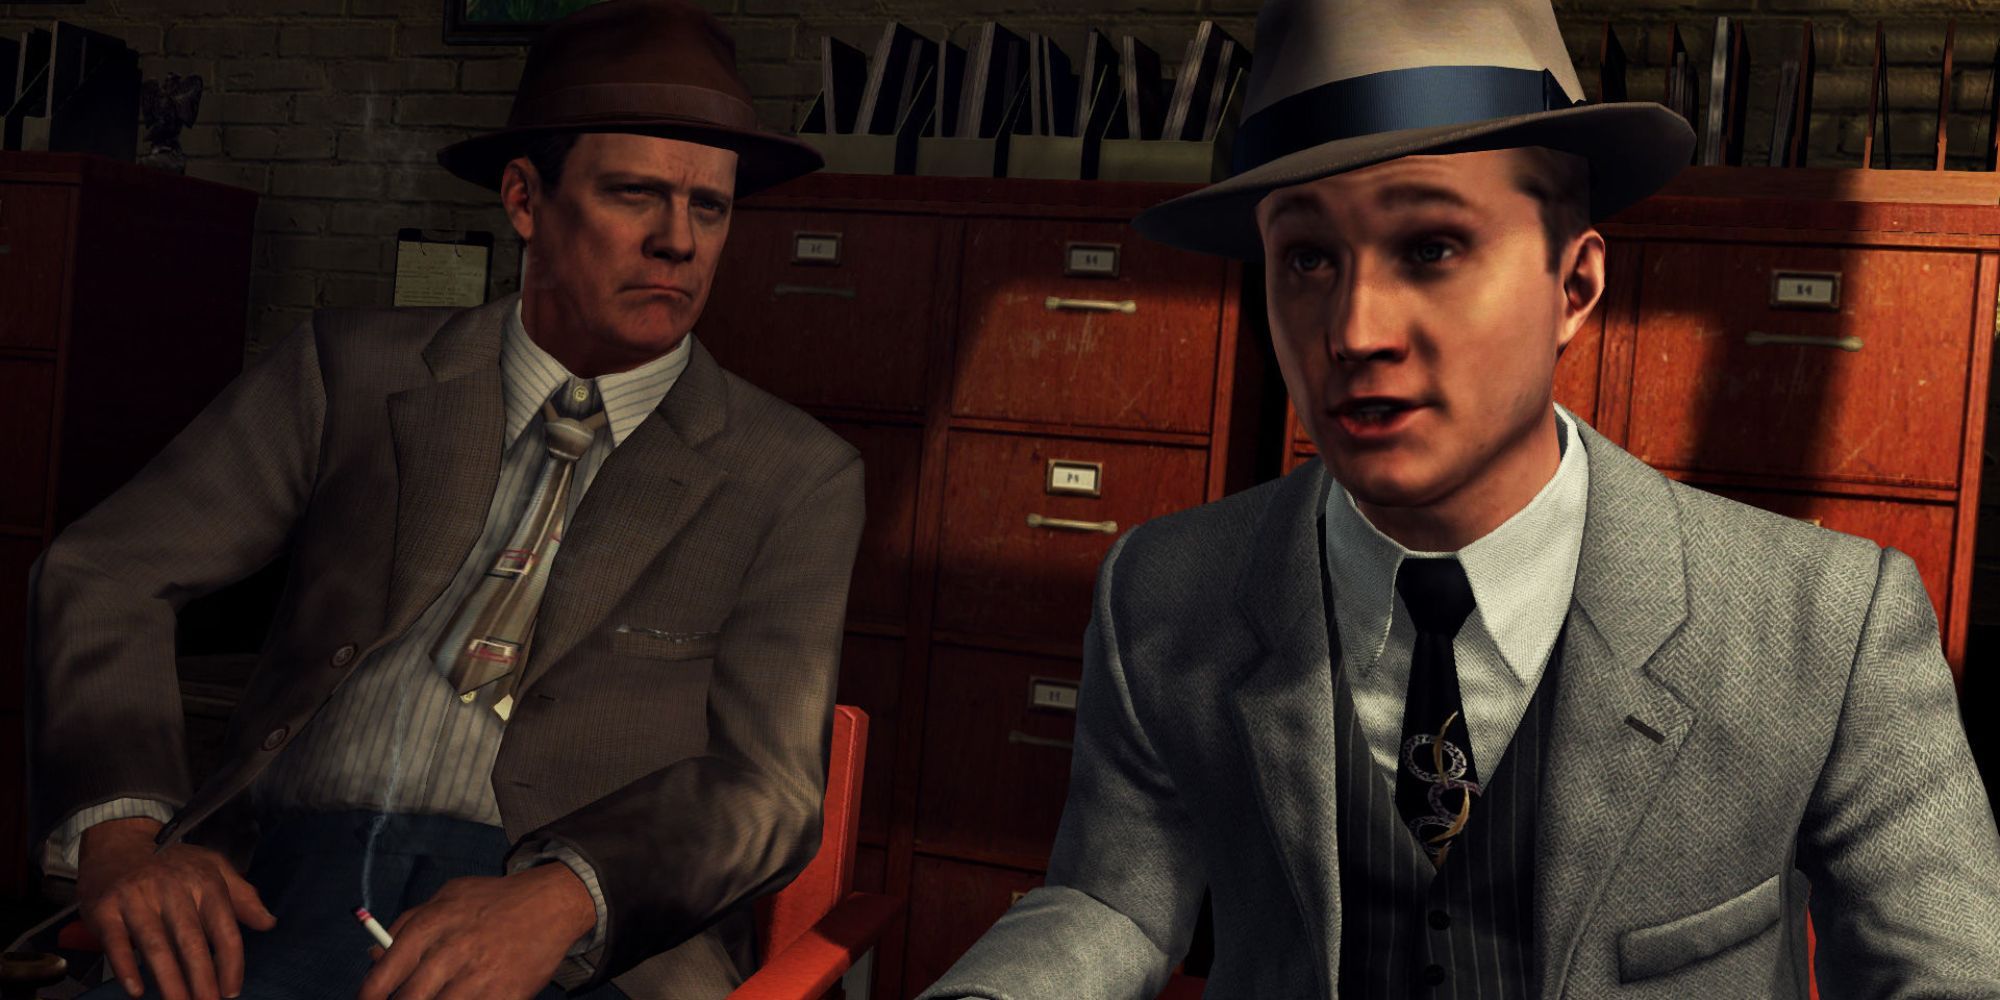 Two detectives from L.A. Noire